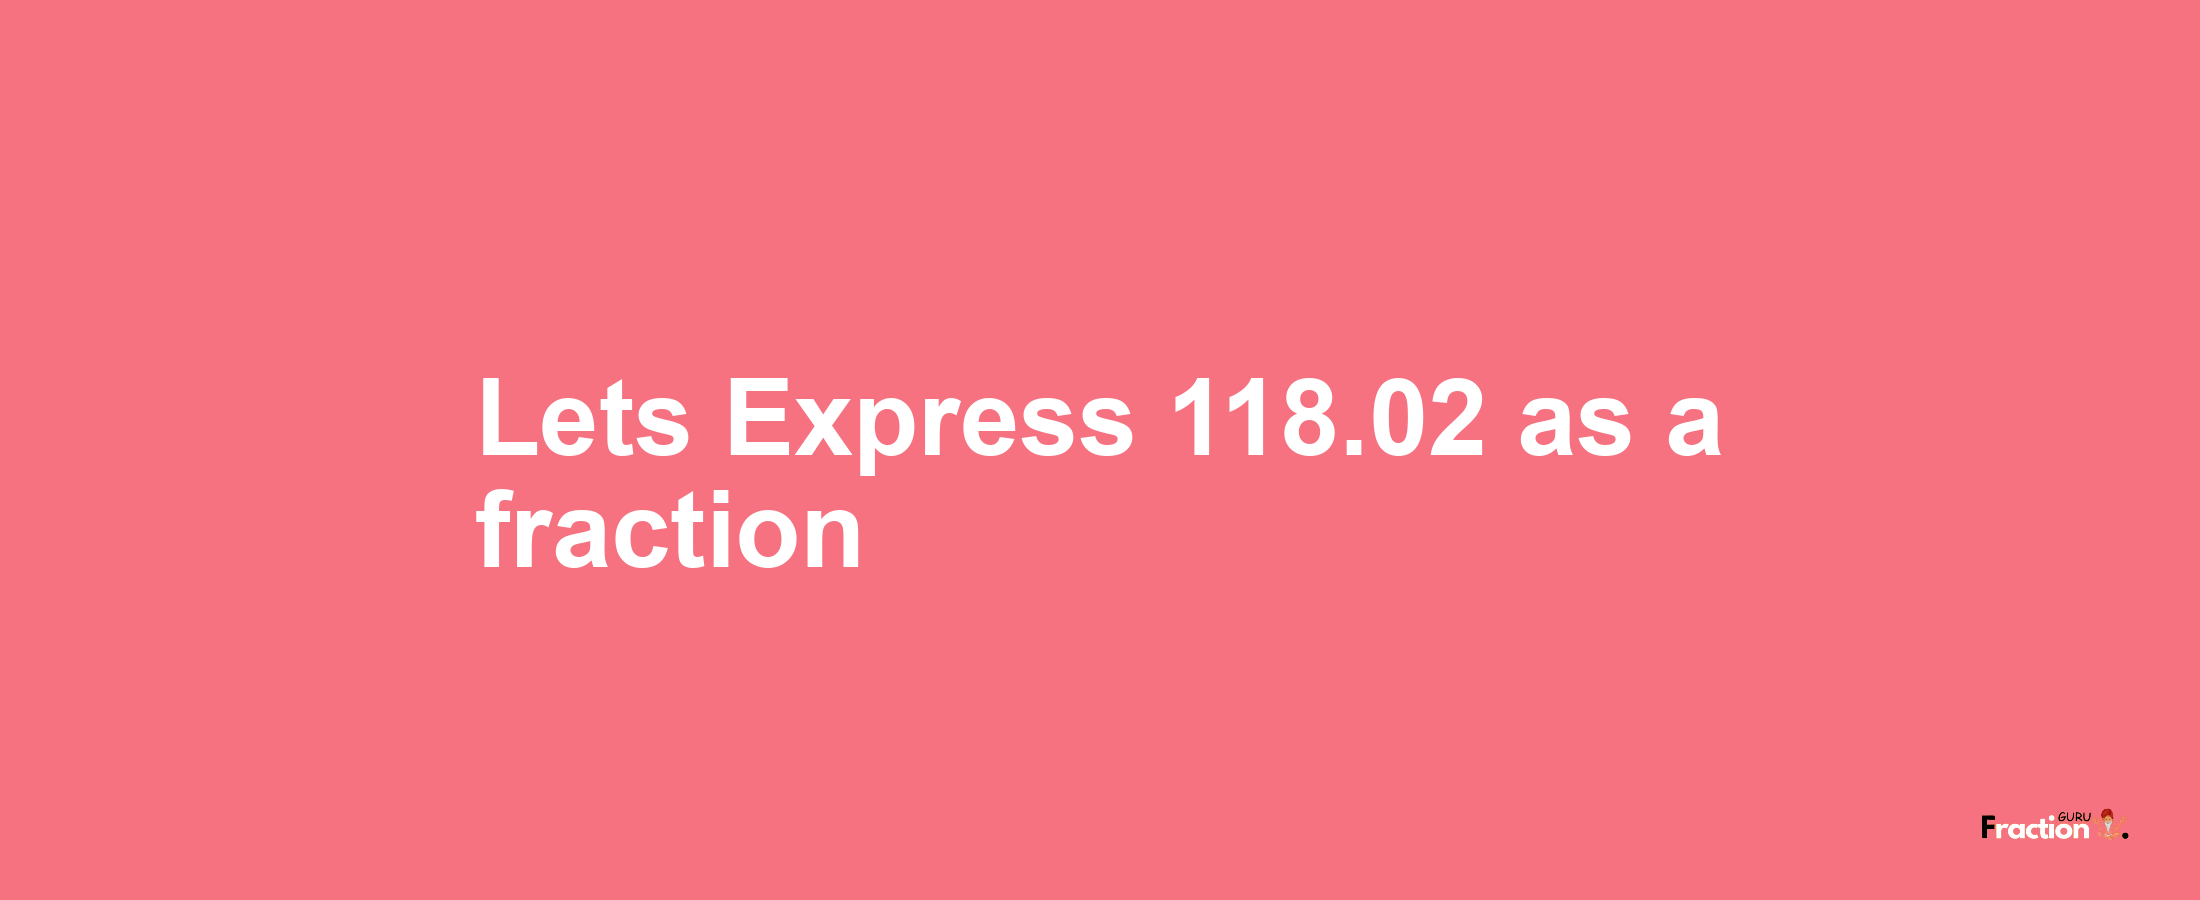 Lets Express 118.02 as afraction